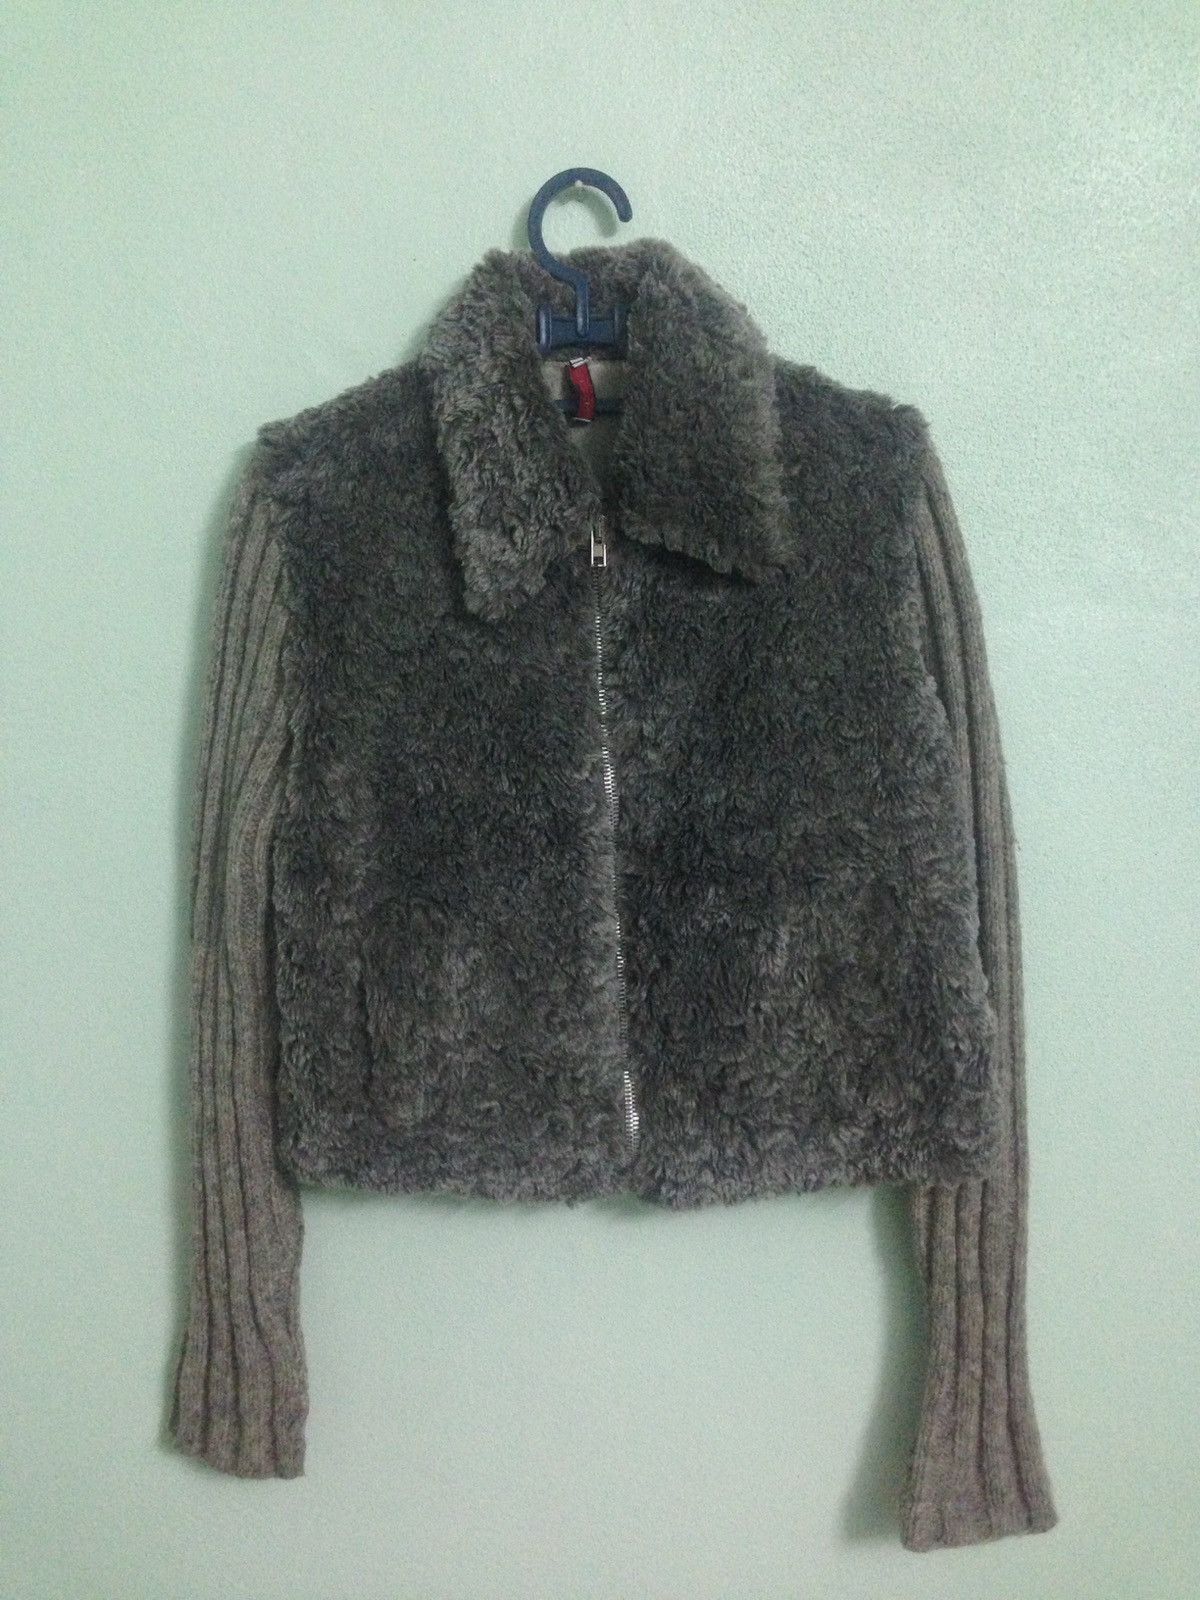 Japanese Brand - LAST DROP !! Max & Co Faux Fur Jacket Only For Japan-GH2719 - 1